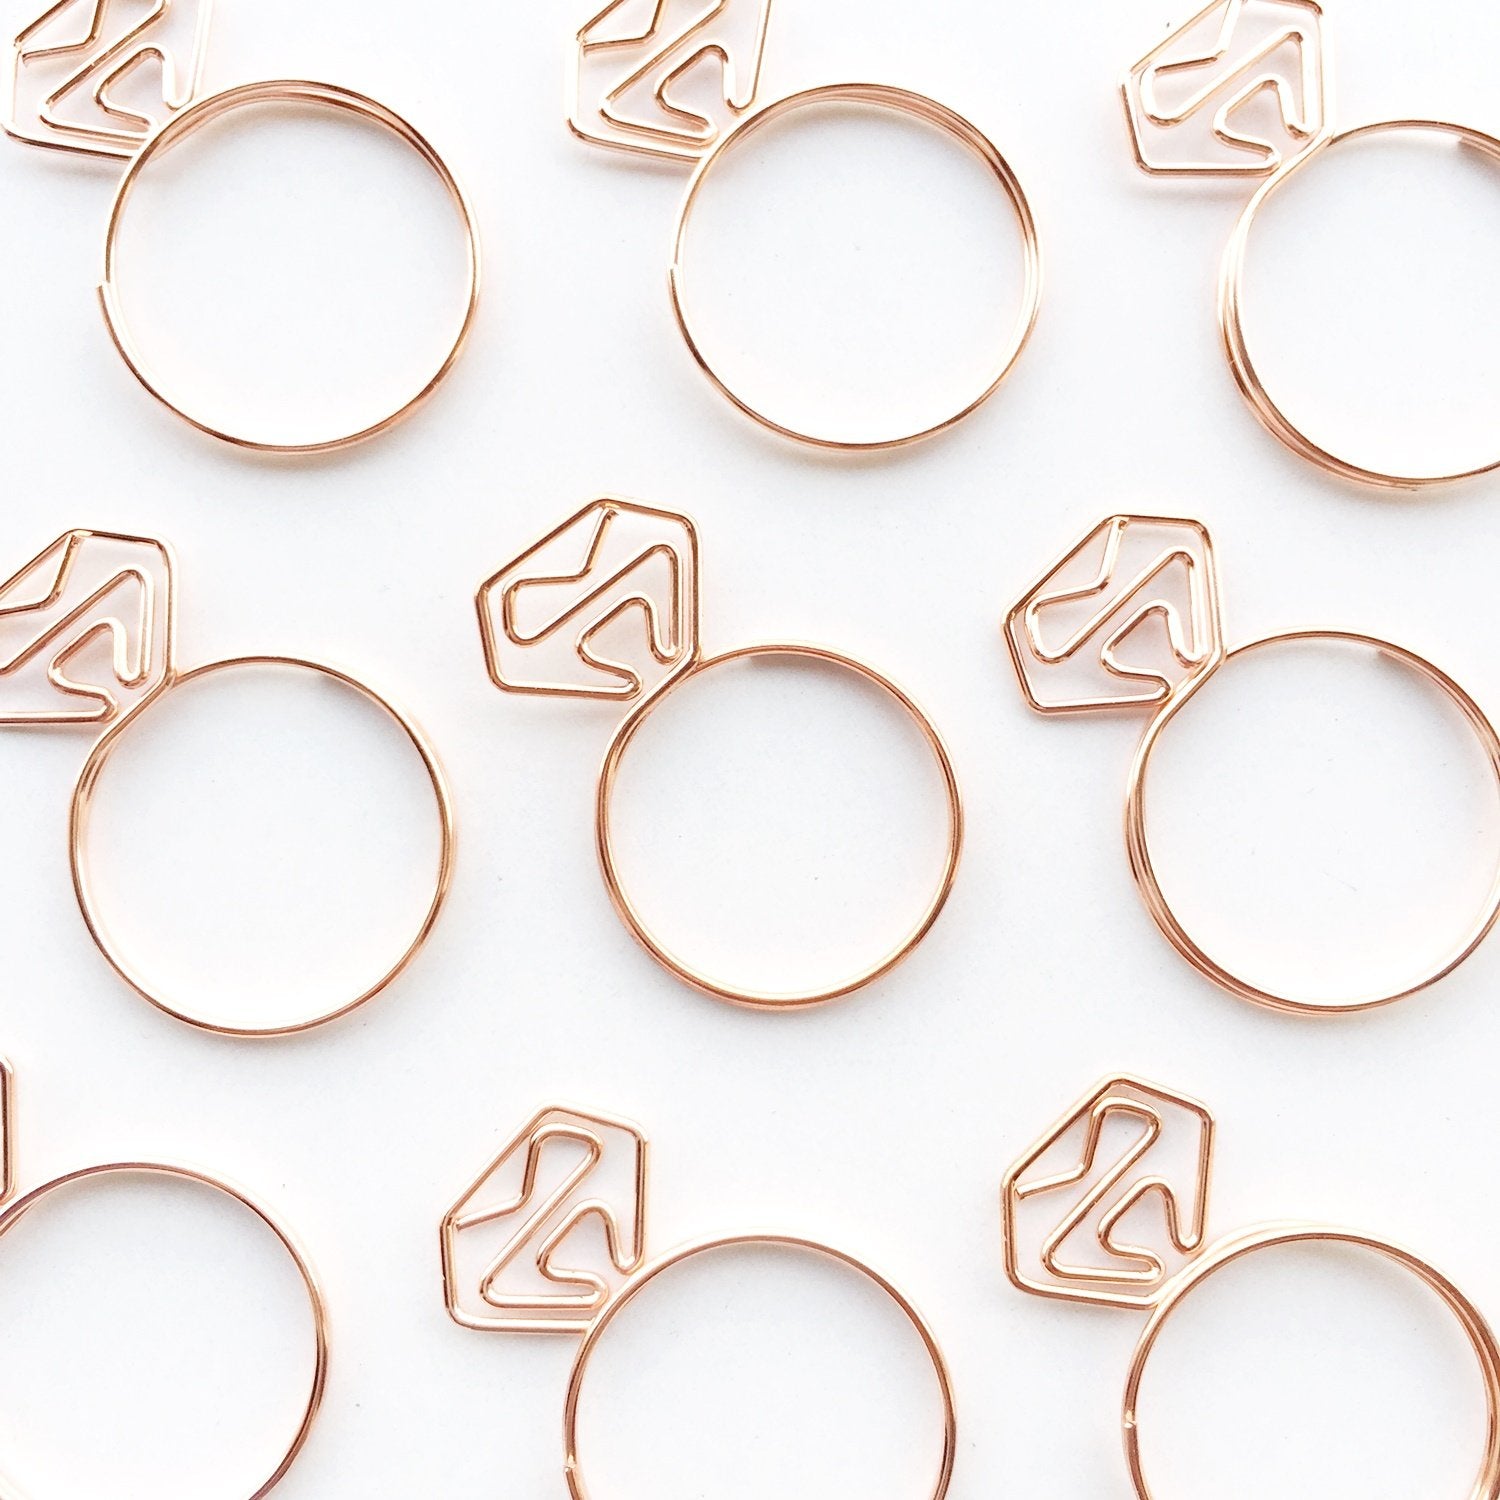 Diamond Ring Paper Clips - The Style Salad